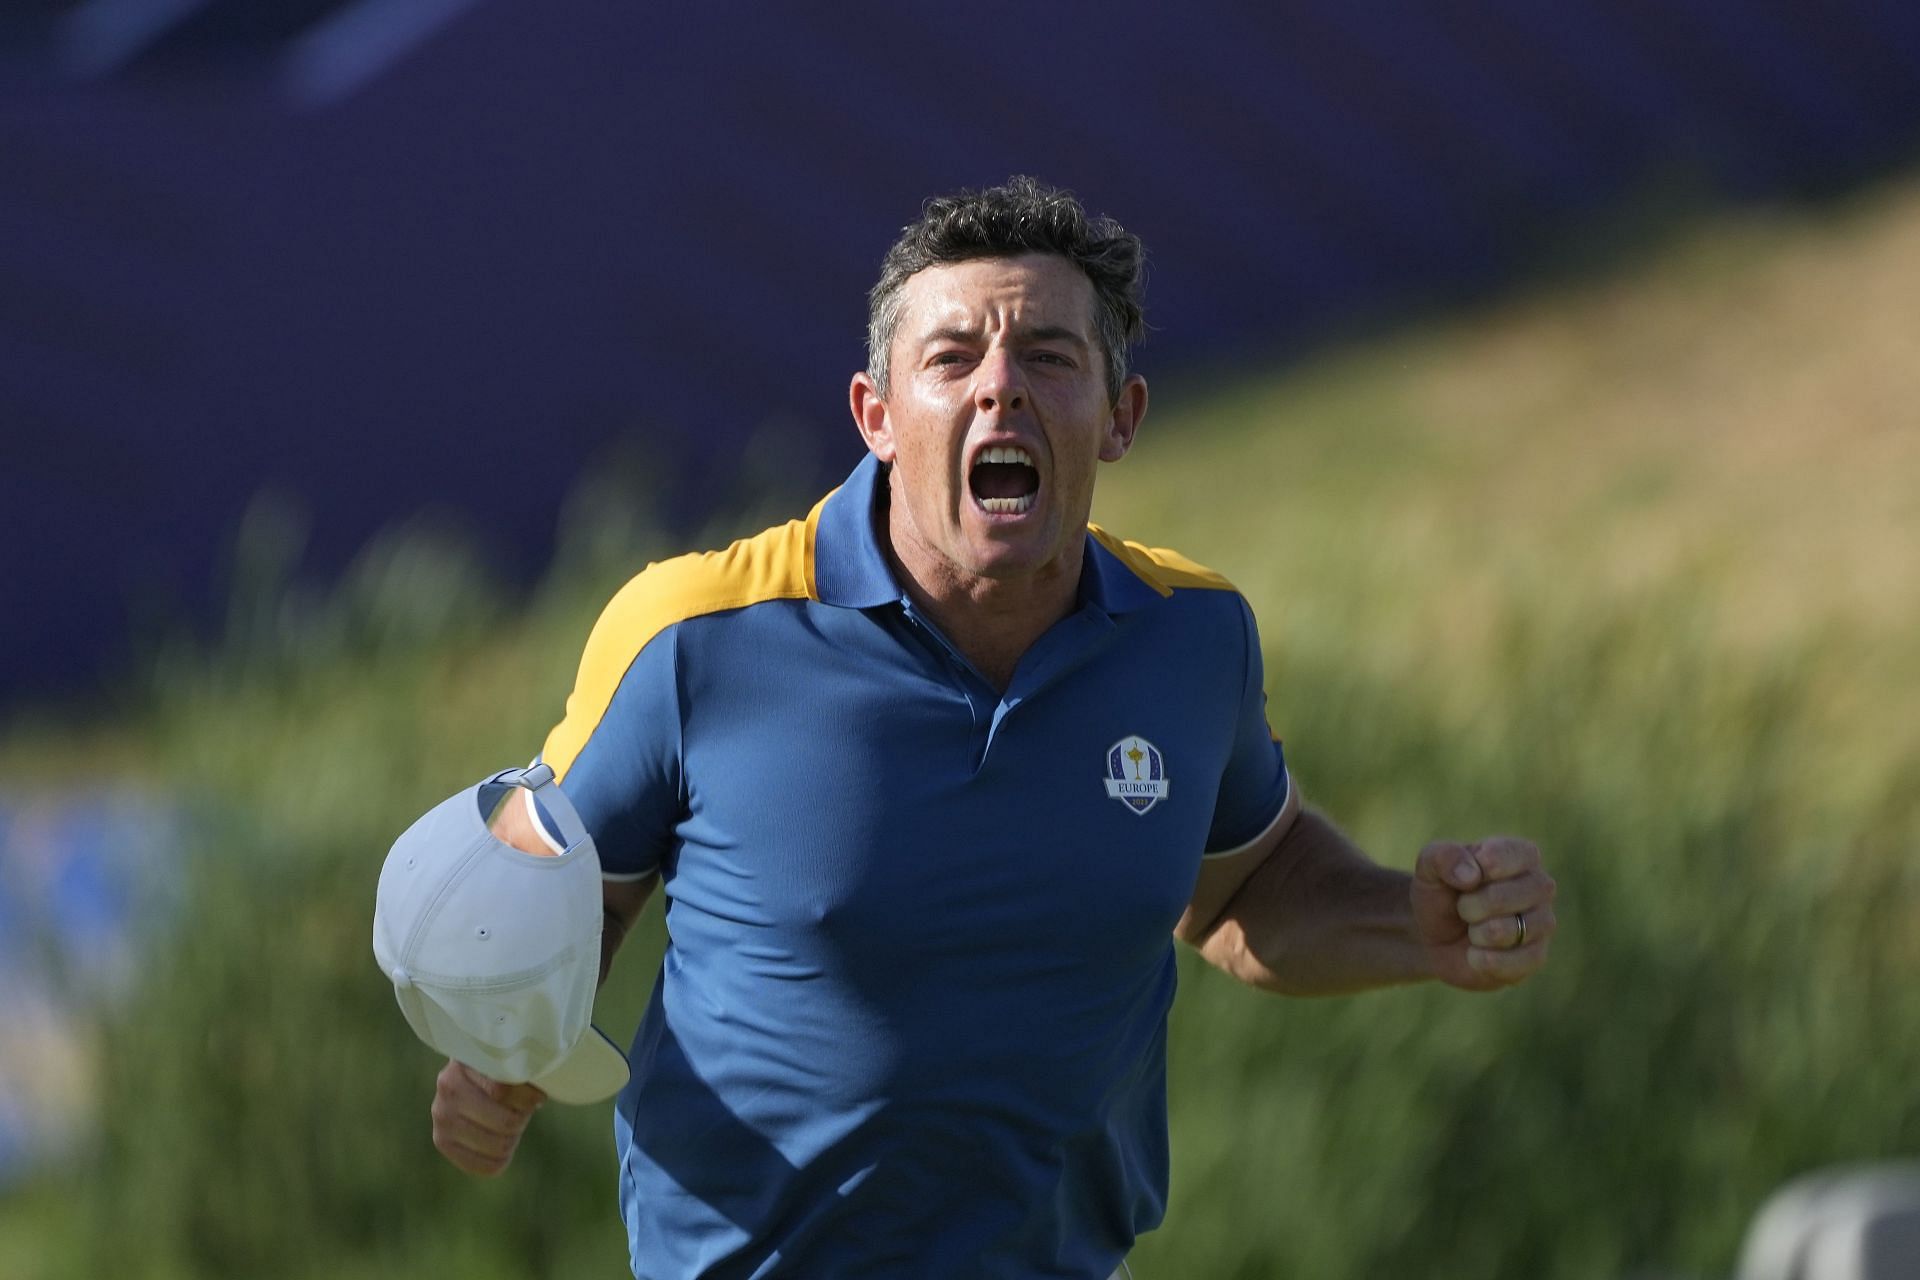 Rory McIlroy was driven by rage